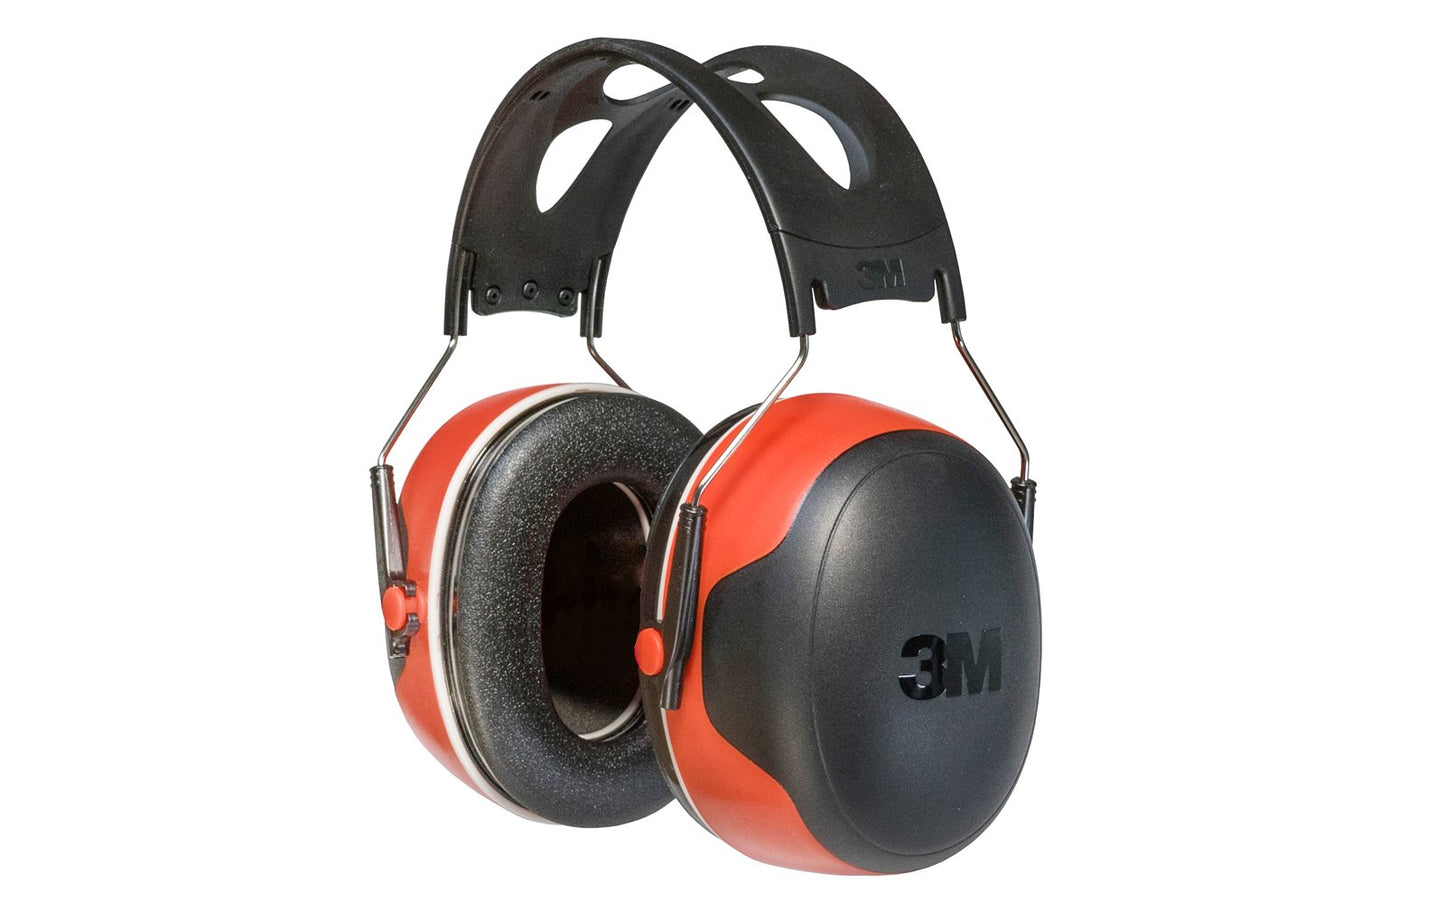 Pro Model - Noise Reduction Rating (NRR) of 30 dB - 3M's #1 noise-reducing earmuff - highest noise reduction rating (NRR) Earmuff - Helps protect against harmful noises at 85 dB & above - Steel wire headband with rubber overmold design for durability & comfort - Model 90565 - 076308873356 - Heavy Duty Earmuff - Cushion